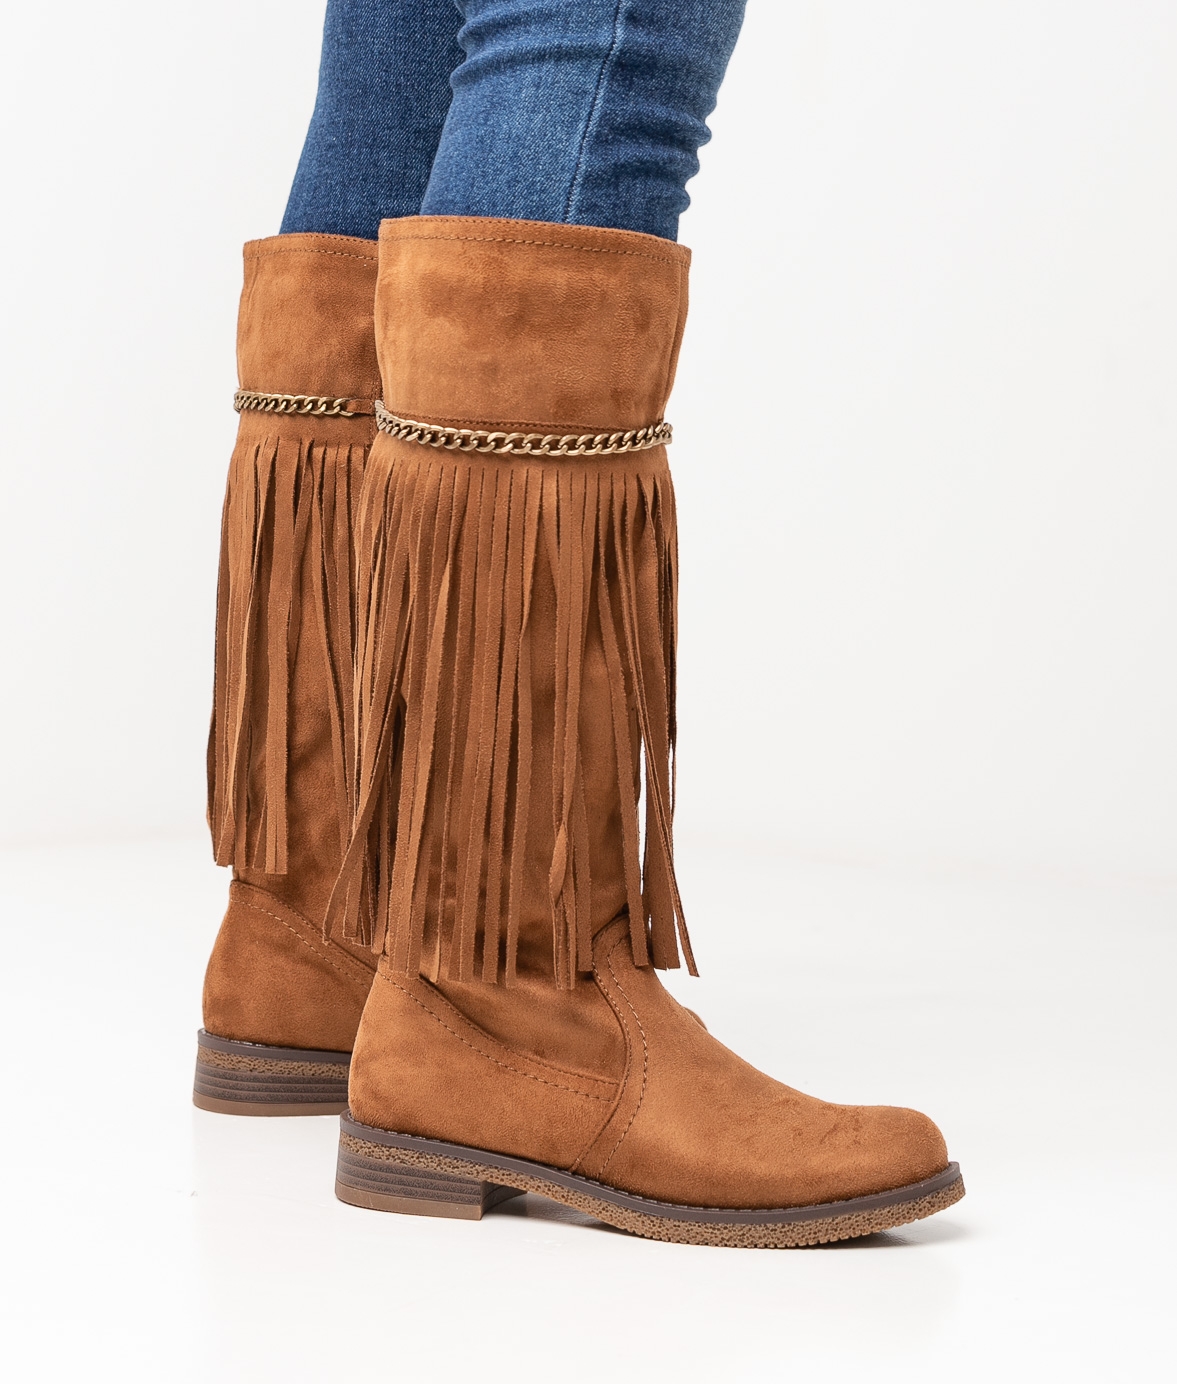 ILMA KNEE-LENGHT BOOT - CAMEL